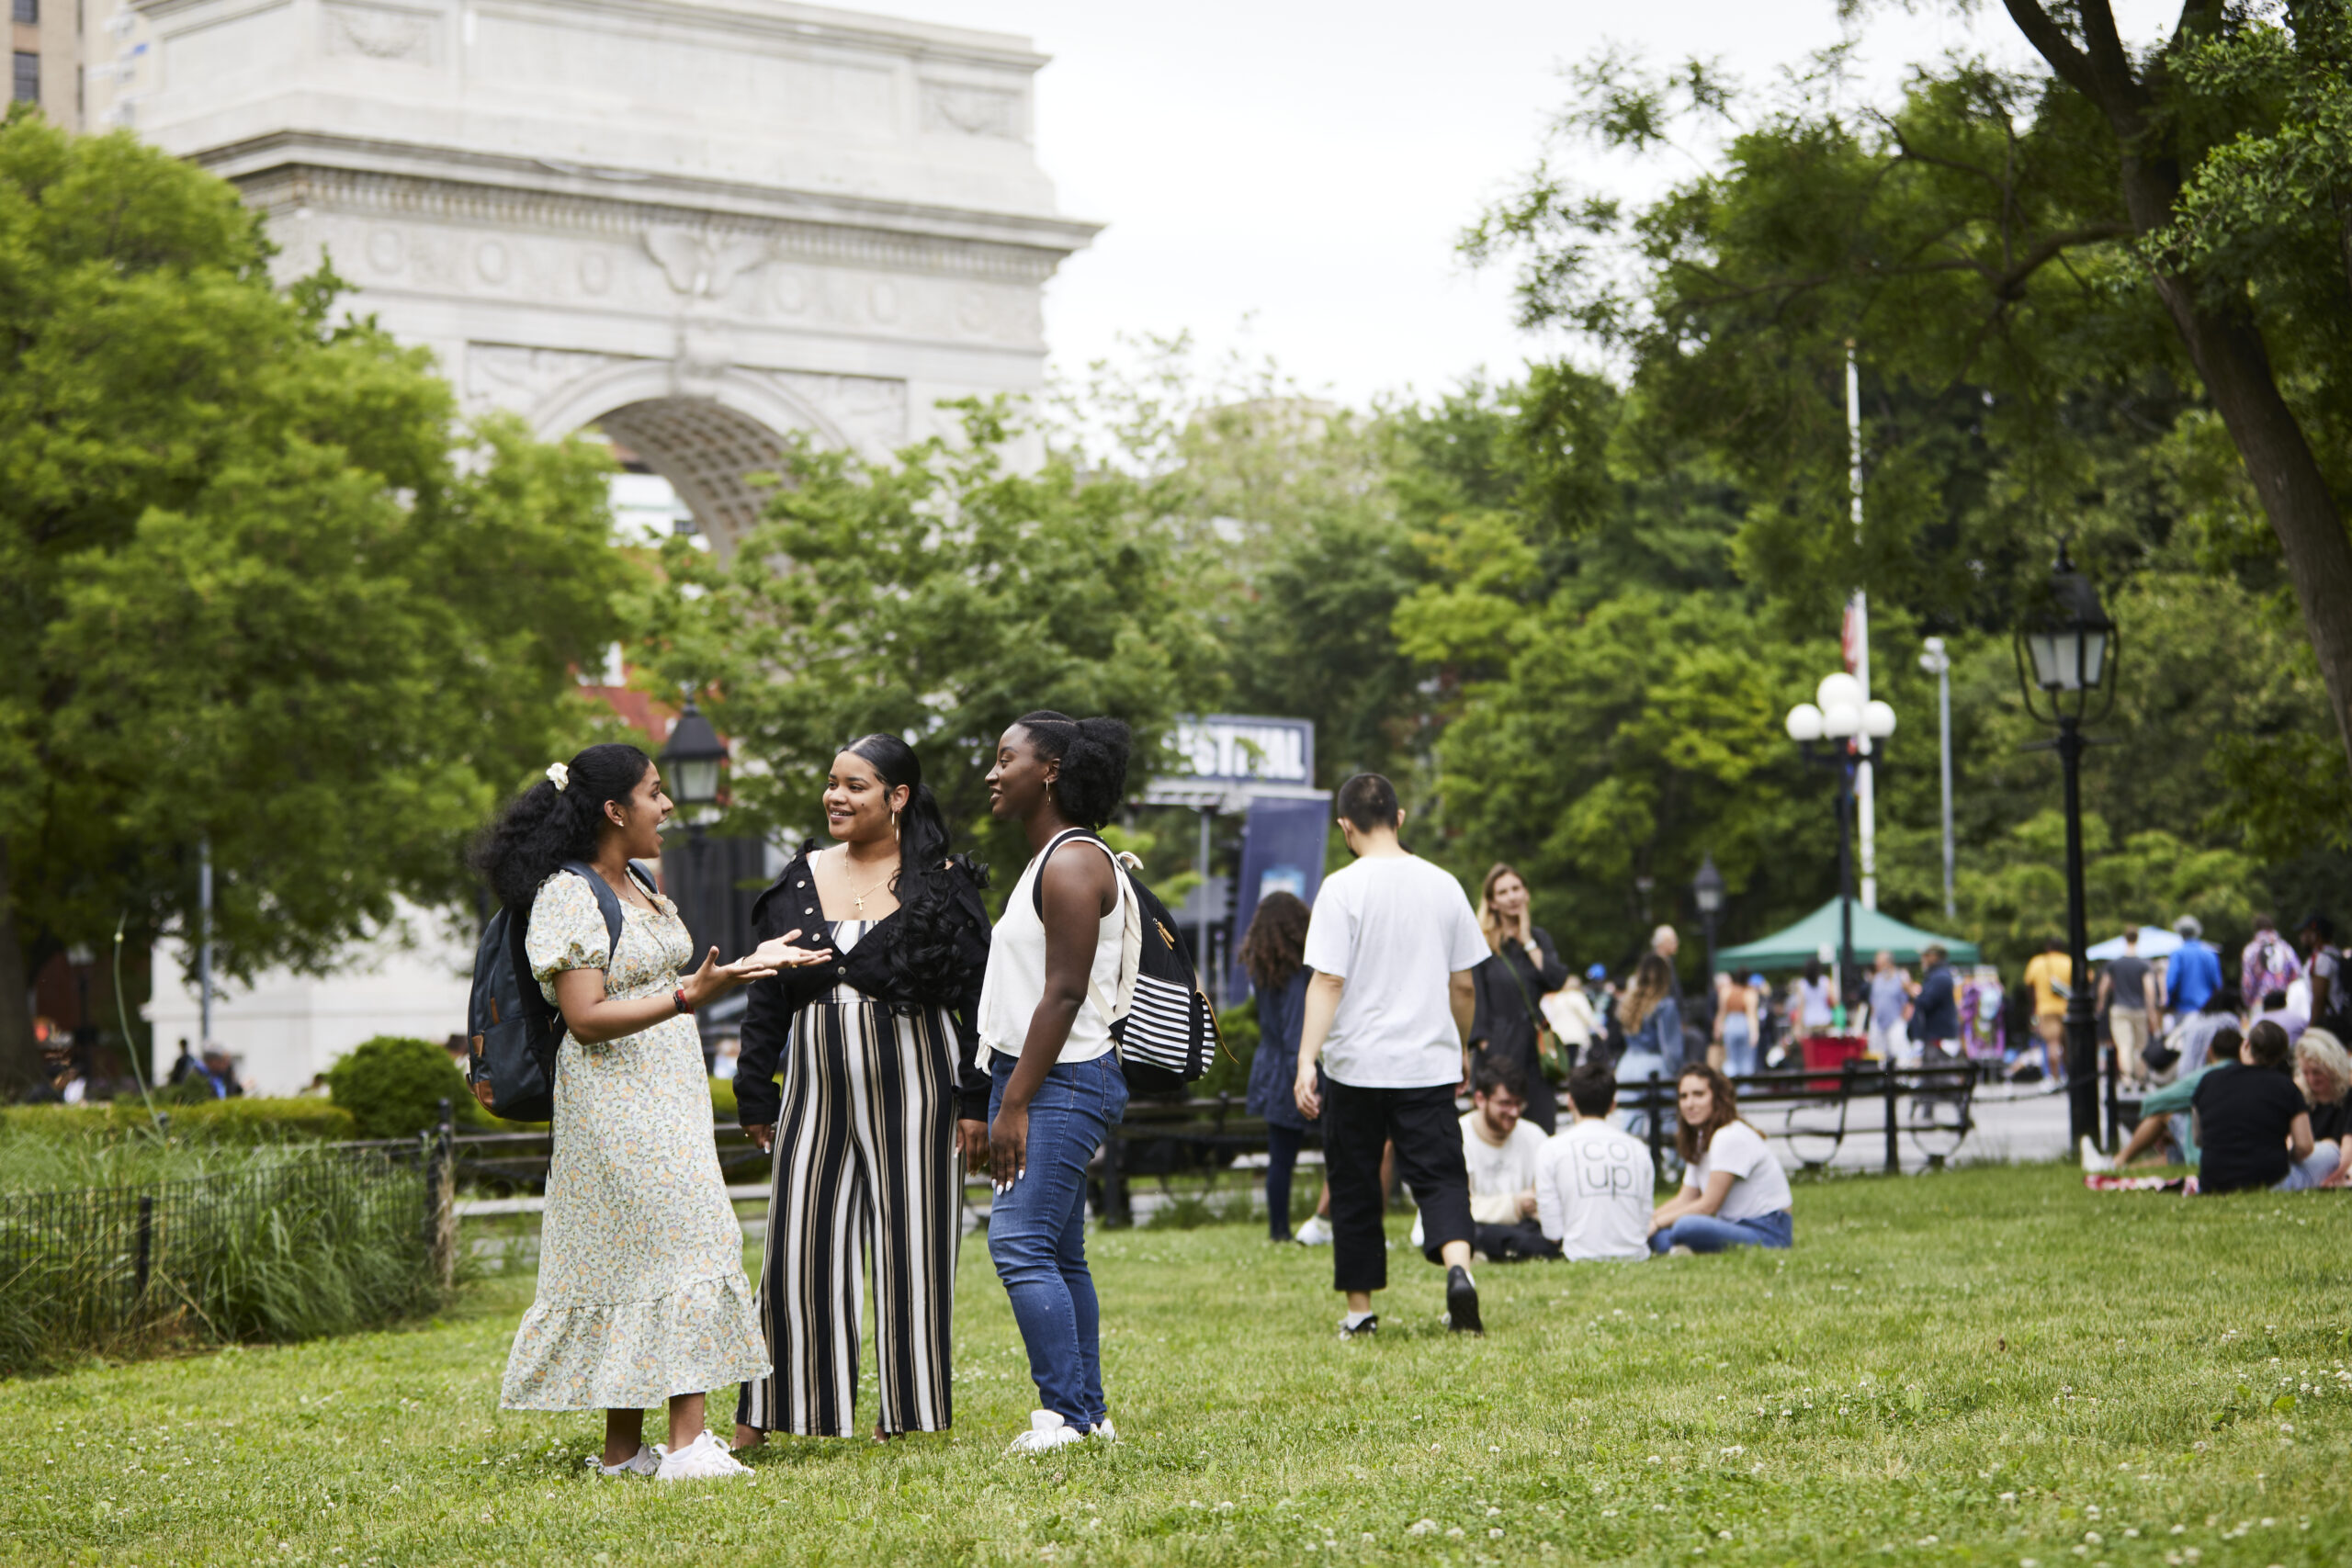 A group of students spending time on the lawns in Washington Square Park in New York City.